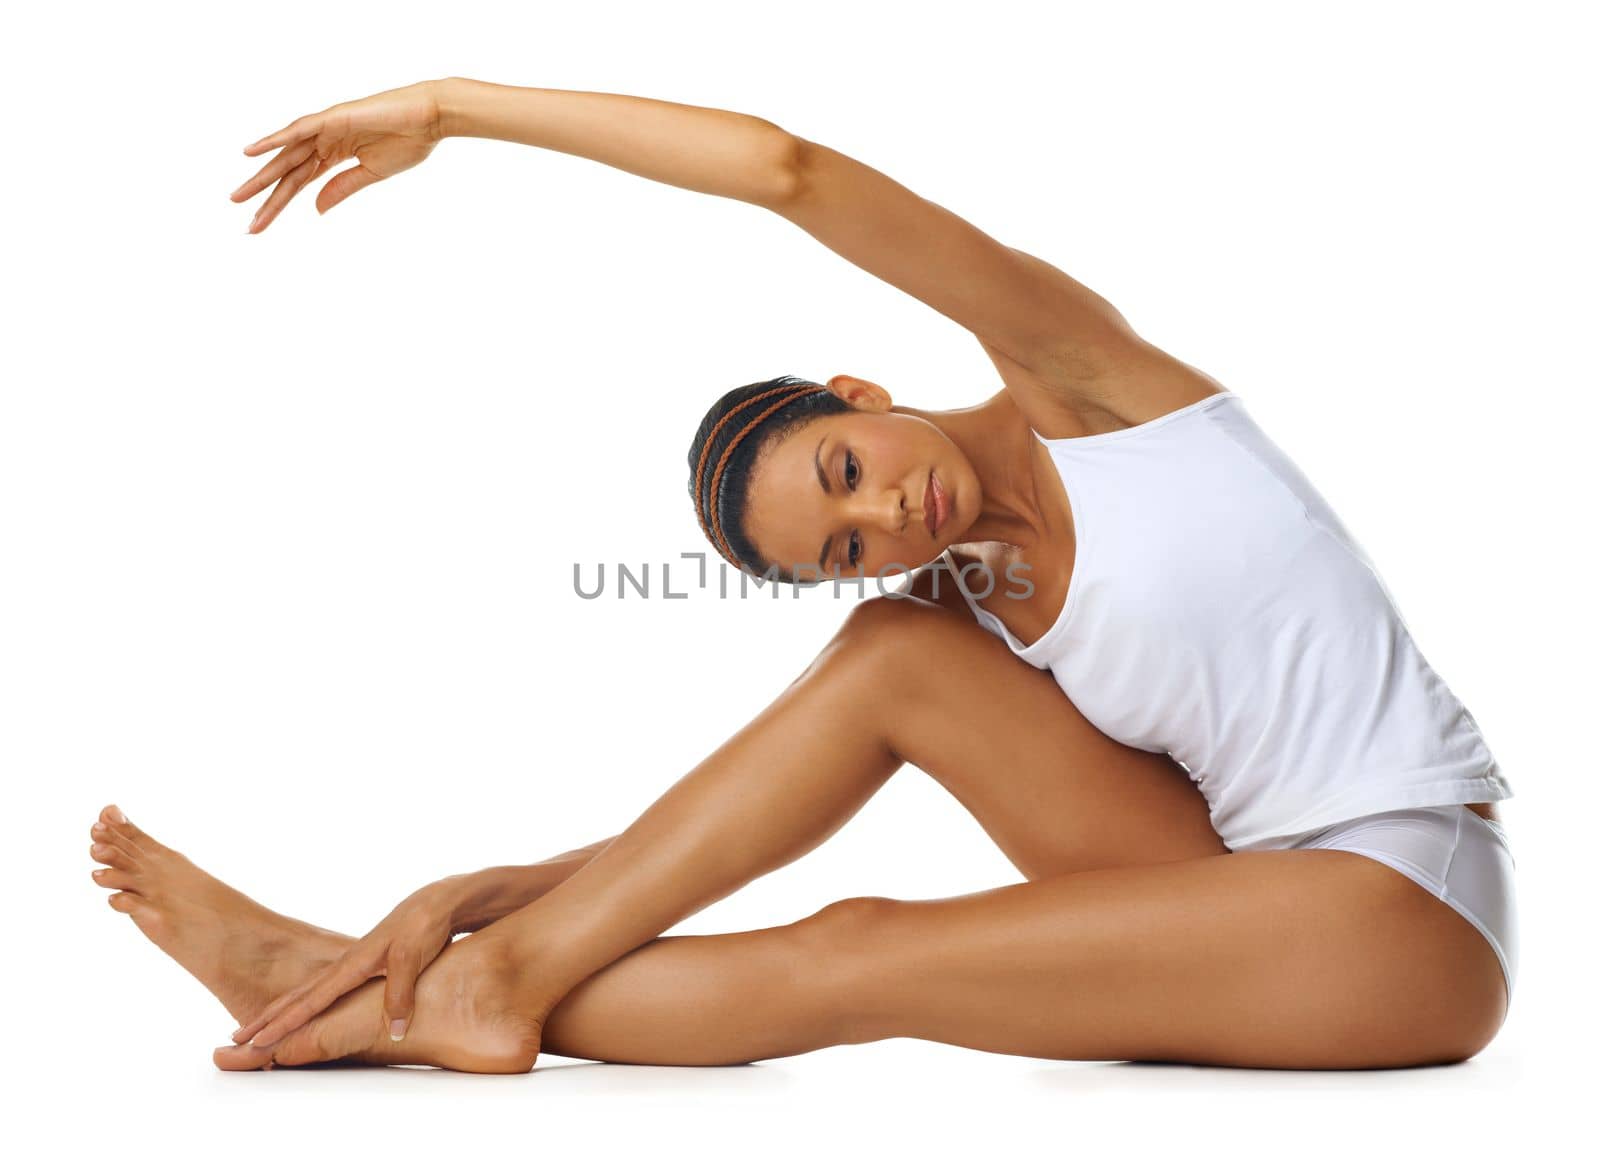 Stretching arms, yoga and woman training for body exercise on a white background in studio. Fitness start, ballet focus and athlete with a warm up during a pilates workout on a studio background.